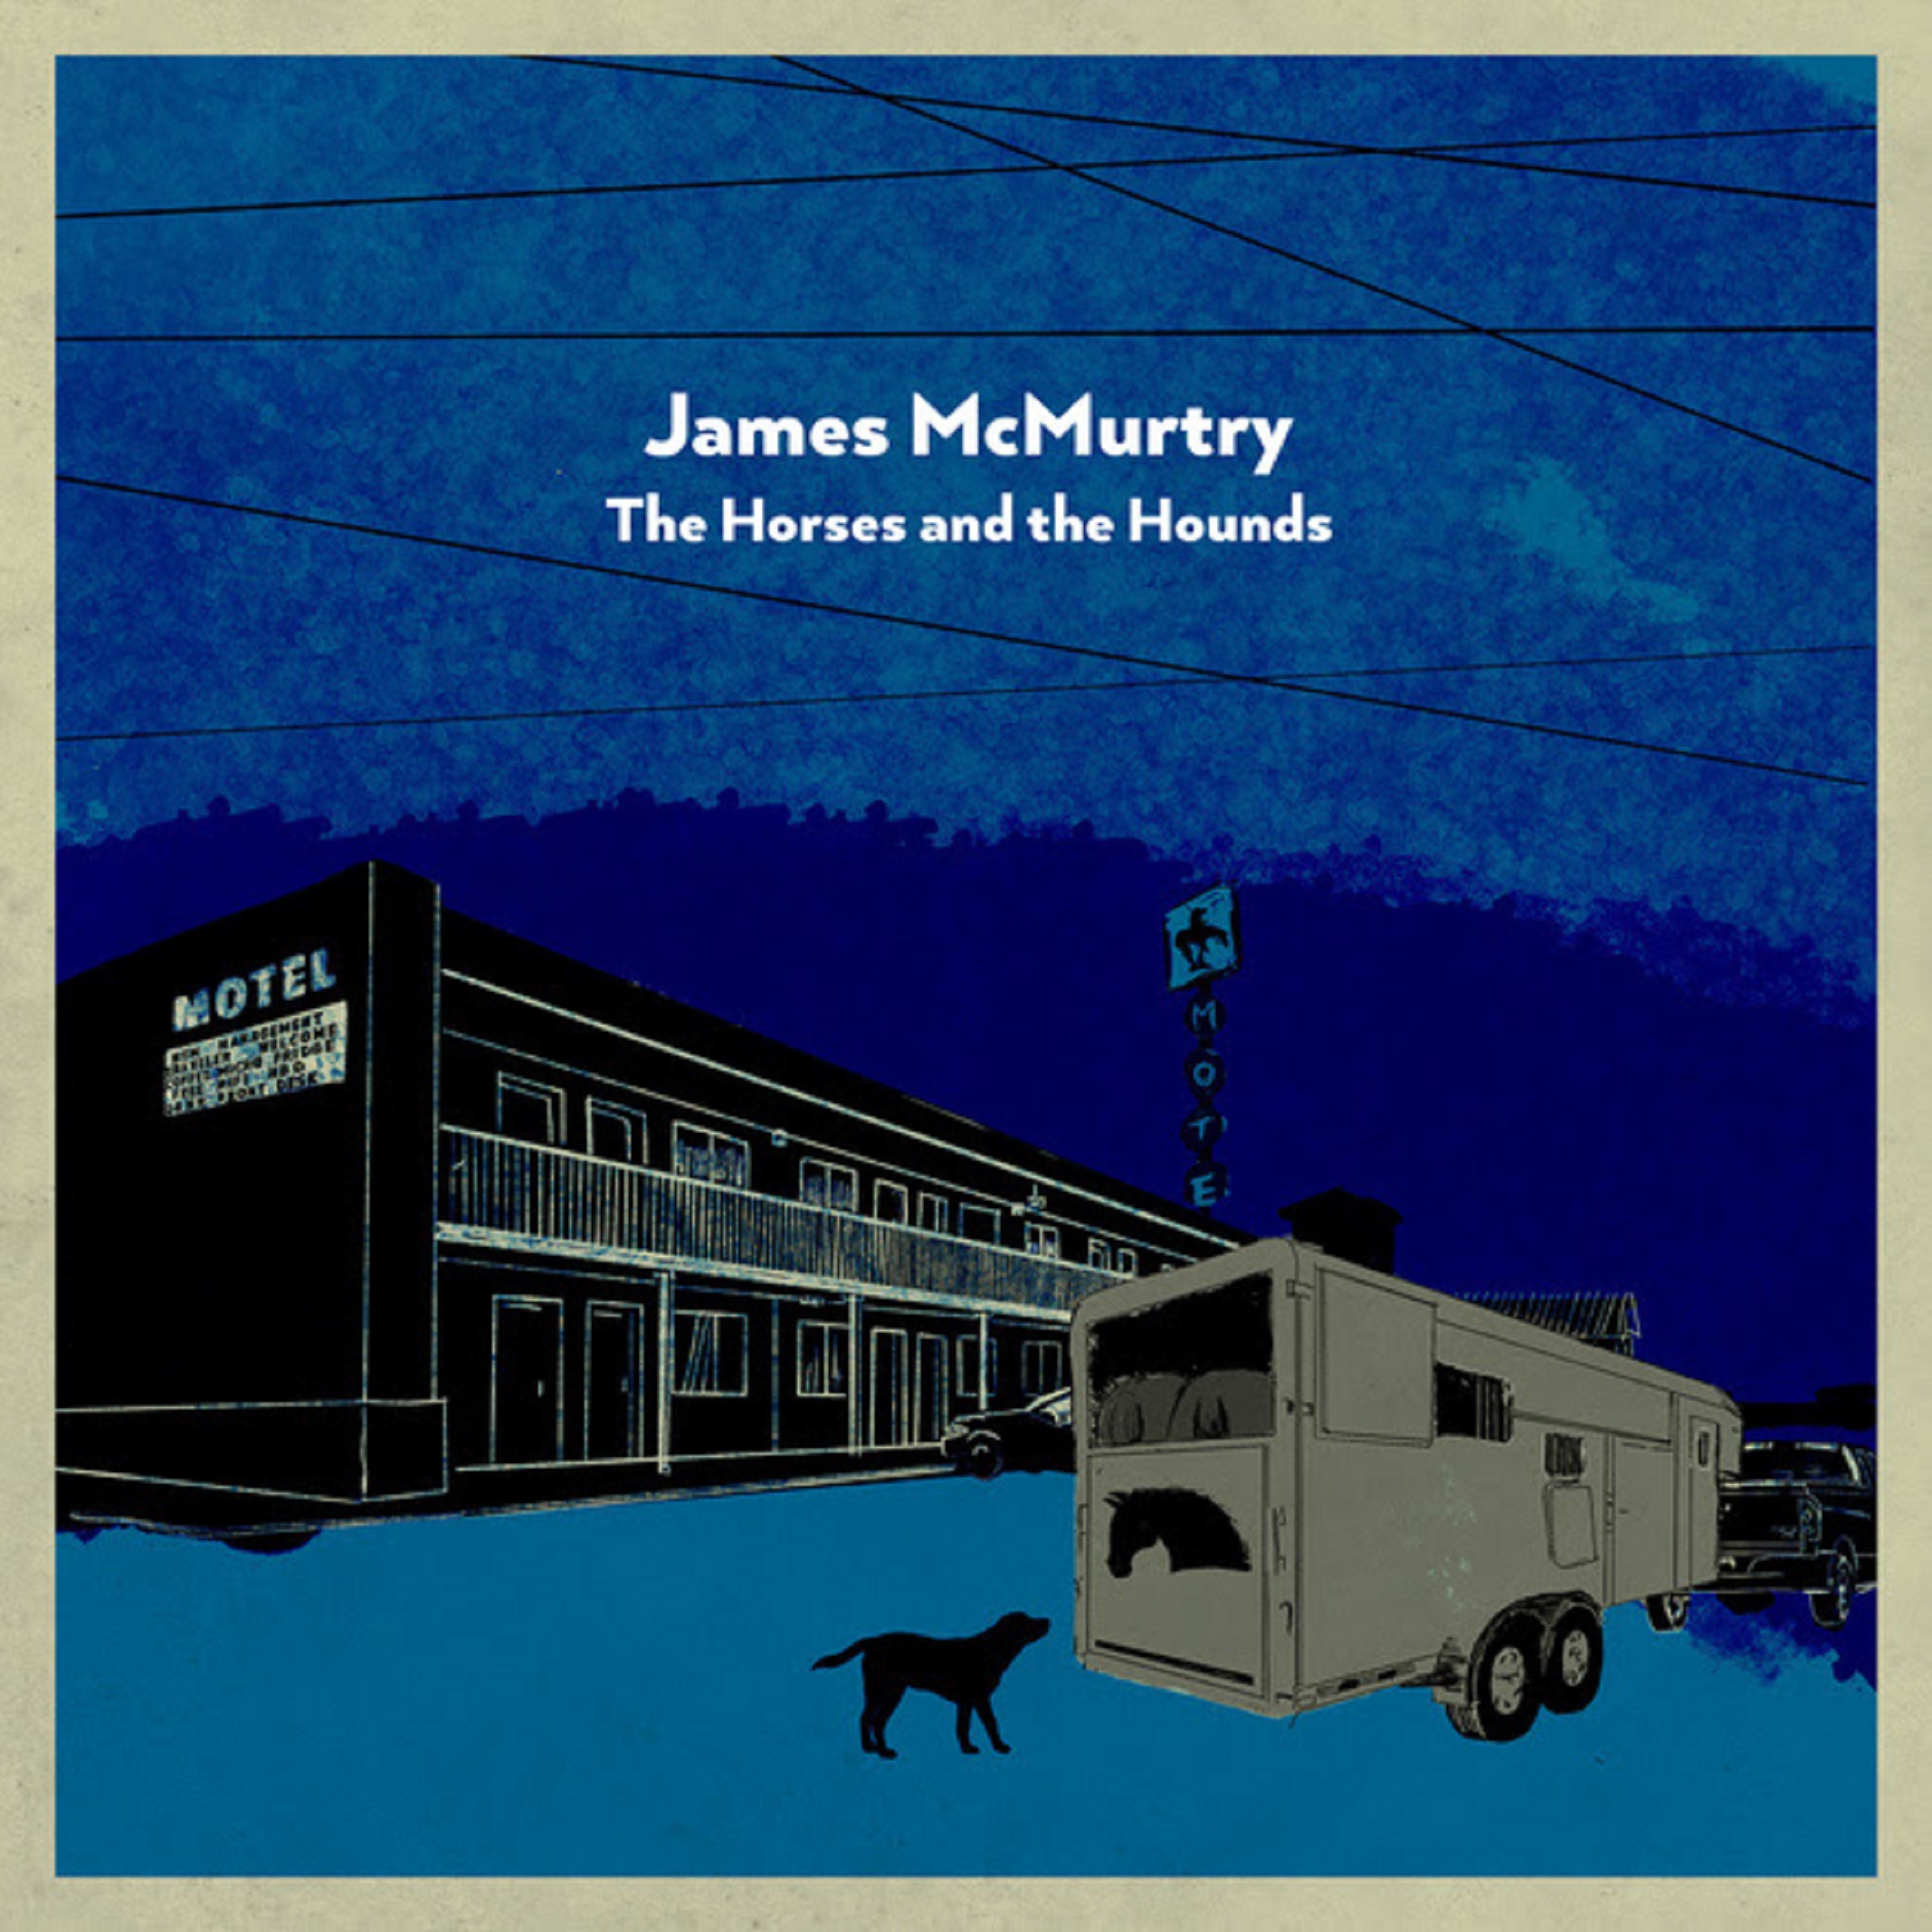 James McMurtry’s “The Horses and the Hounds” National U.S. Tour